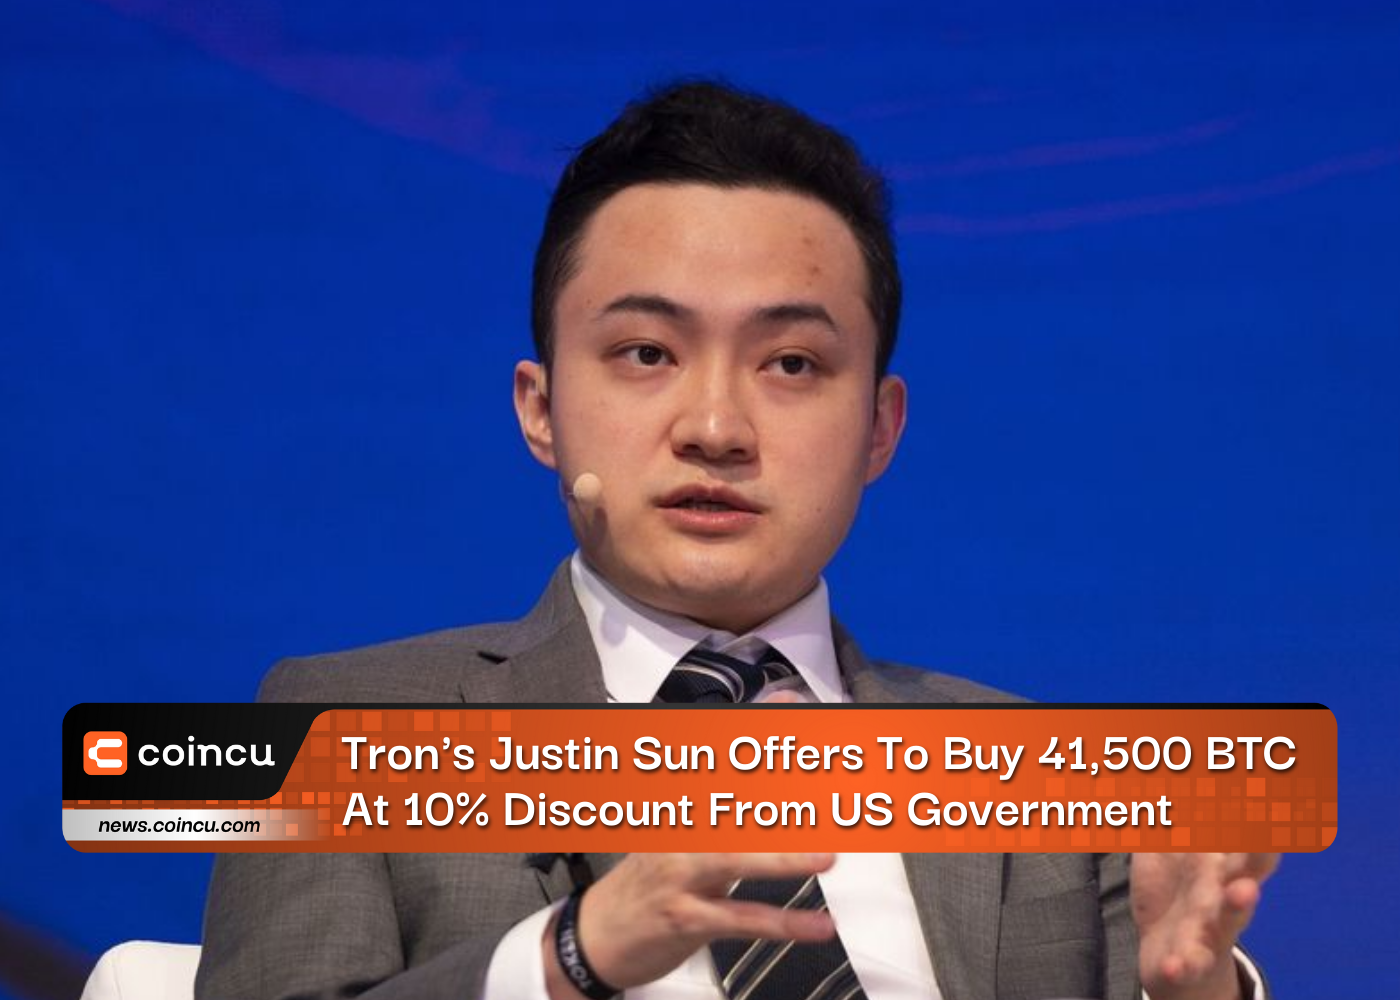 Tron's Justin Sun Offers To Buy 41,500 BTC At 10% Discount From US Government